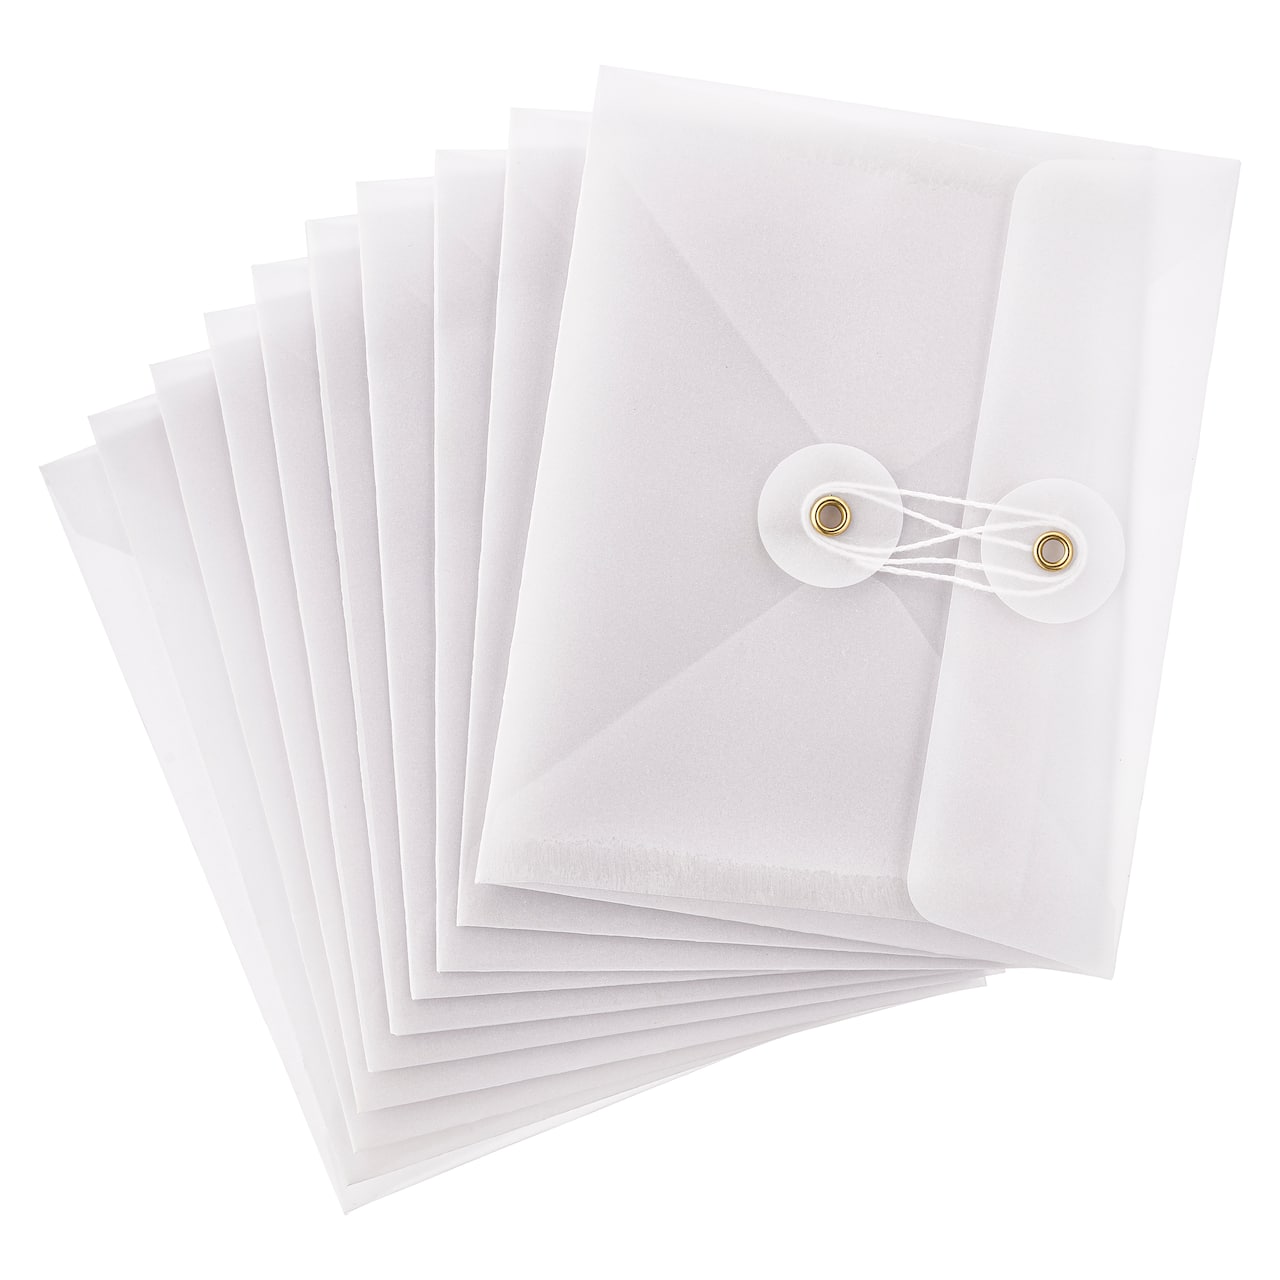 A2 White String & Button Closure Vellum Envelopes by Recollections™, 10ct.